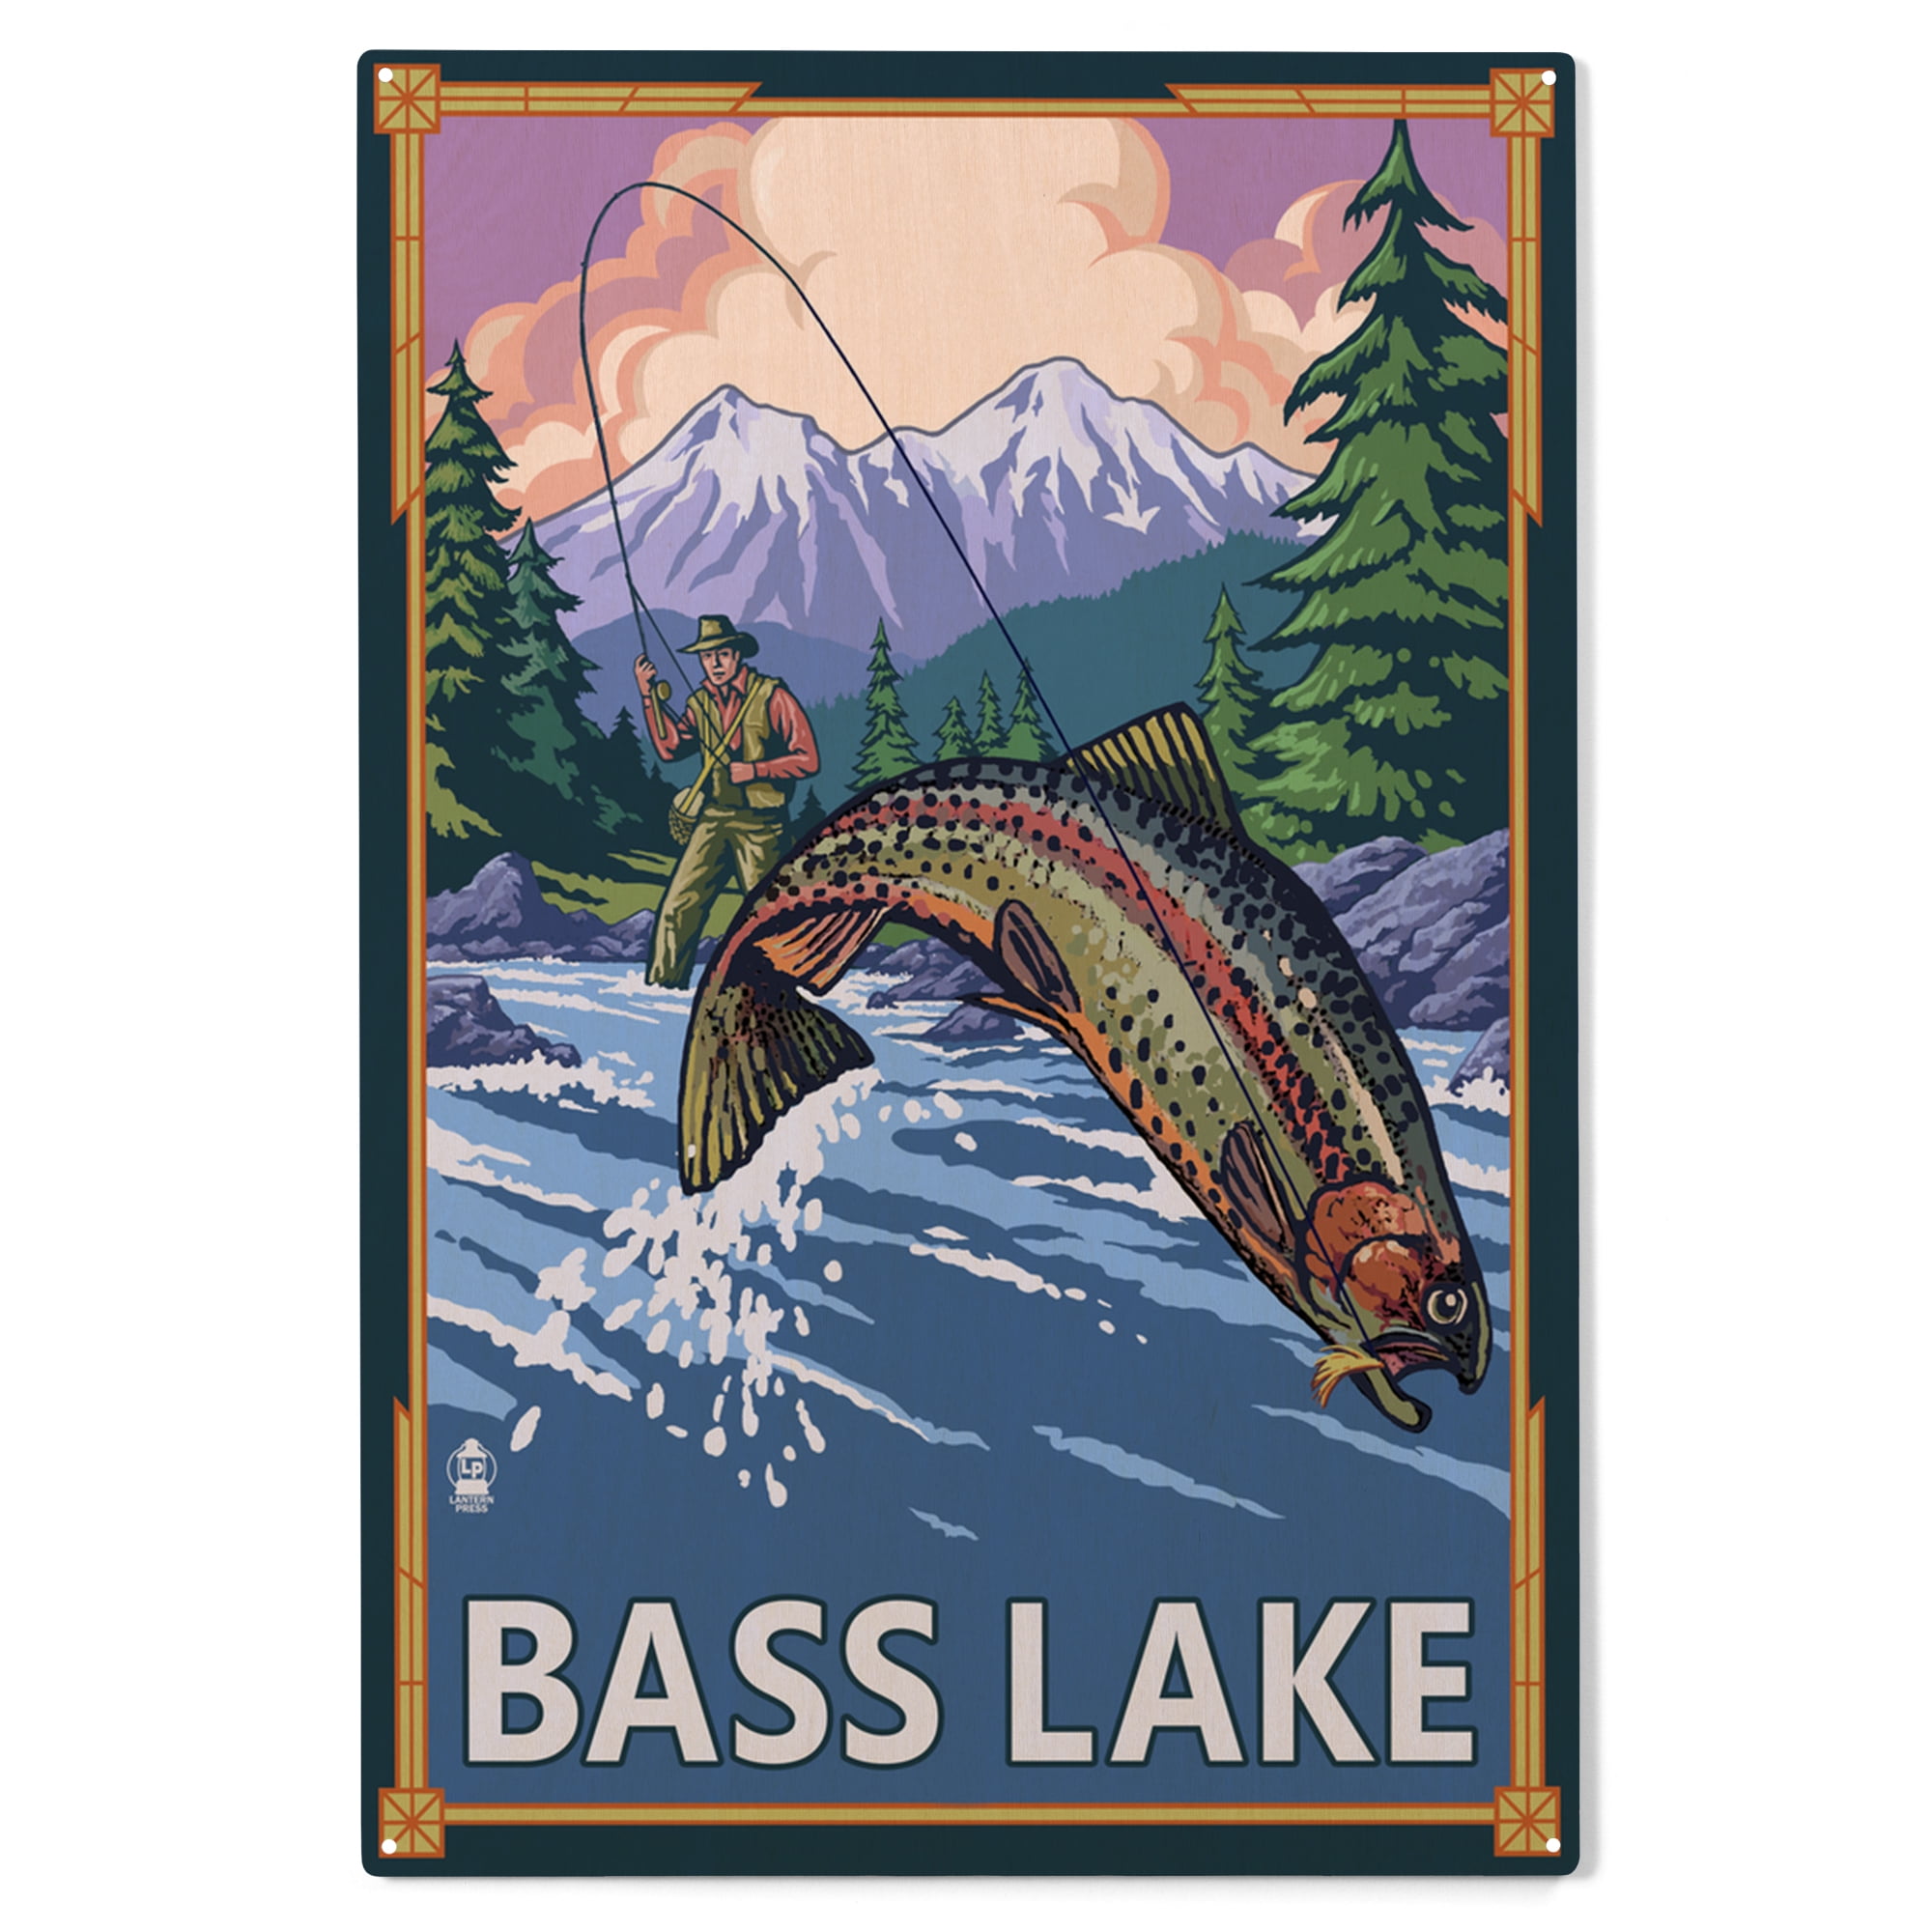 Bass Lake, California, Angler Fly Fishing Scene (Leaping Trout